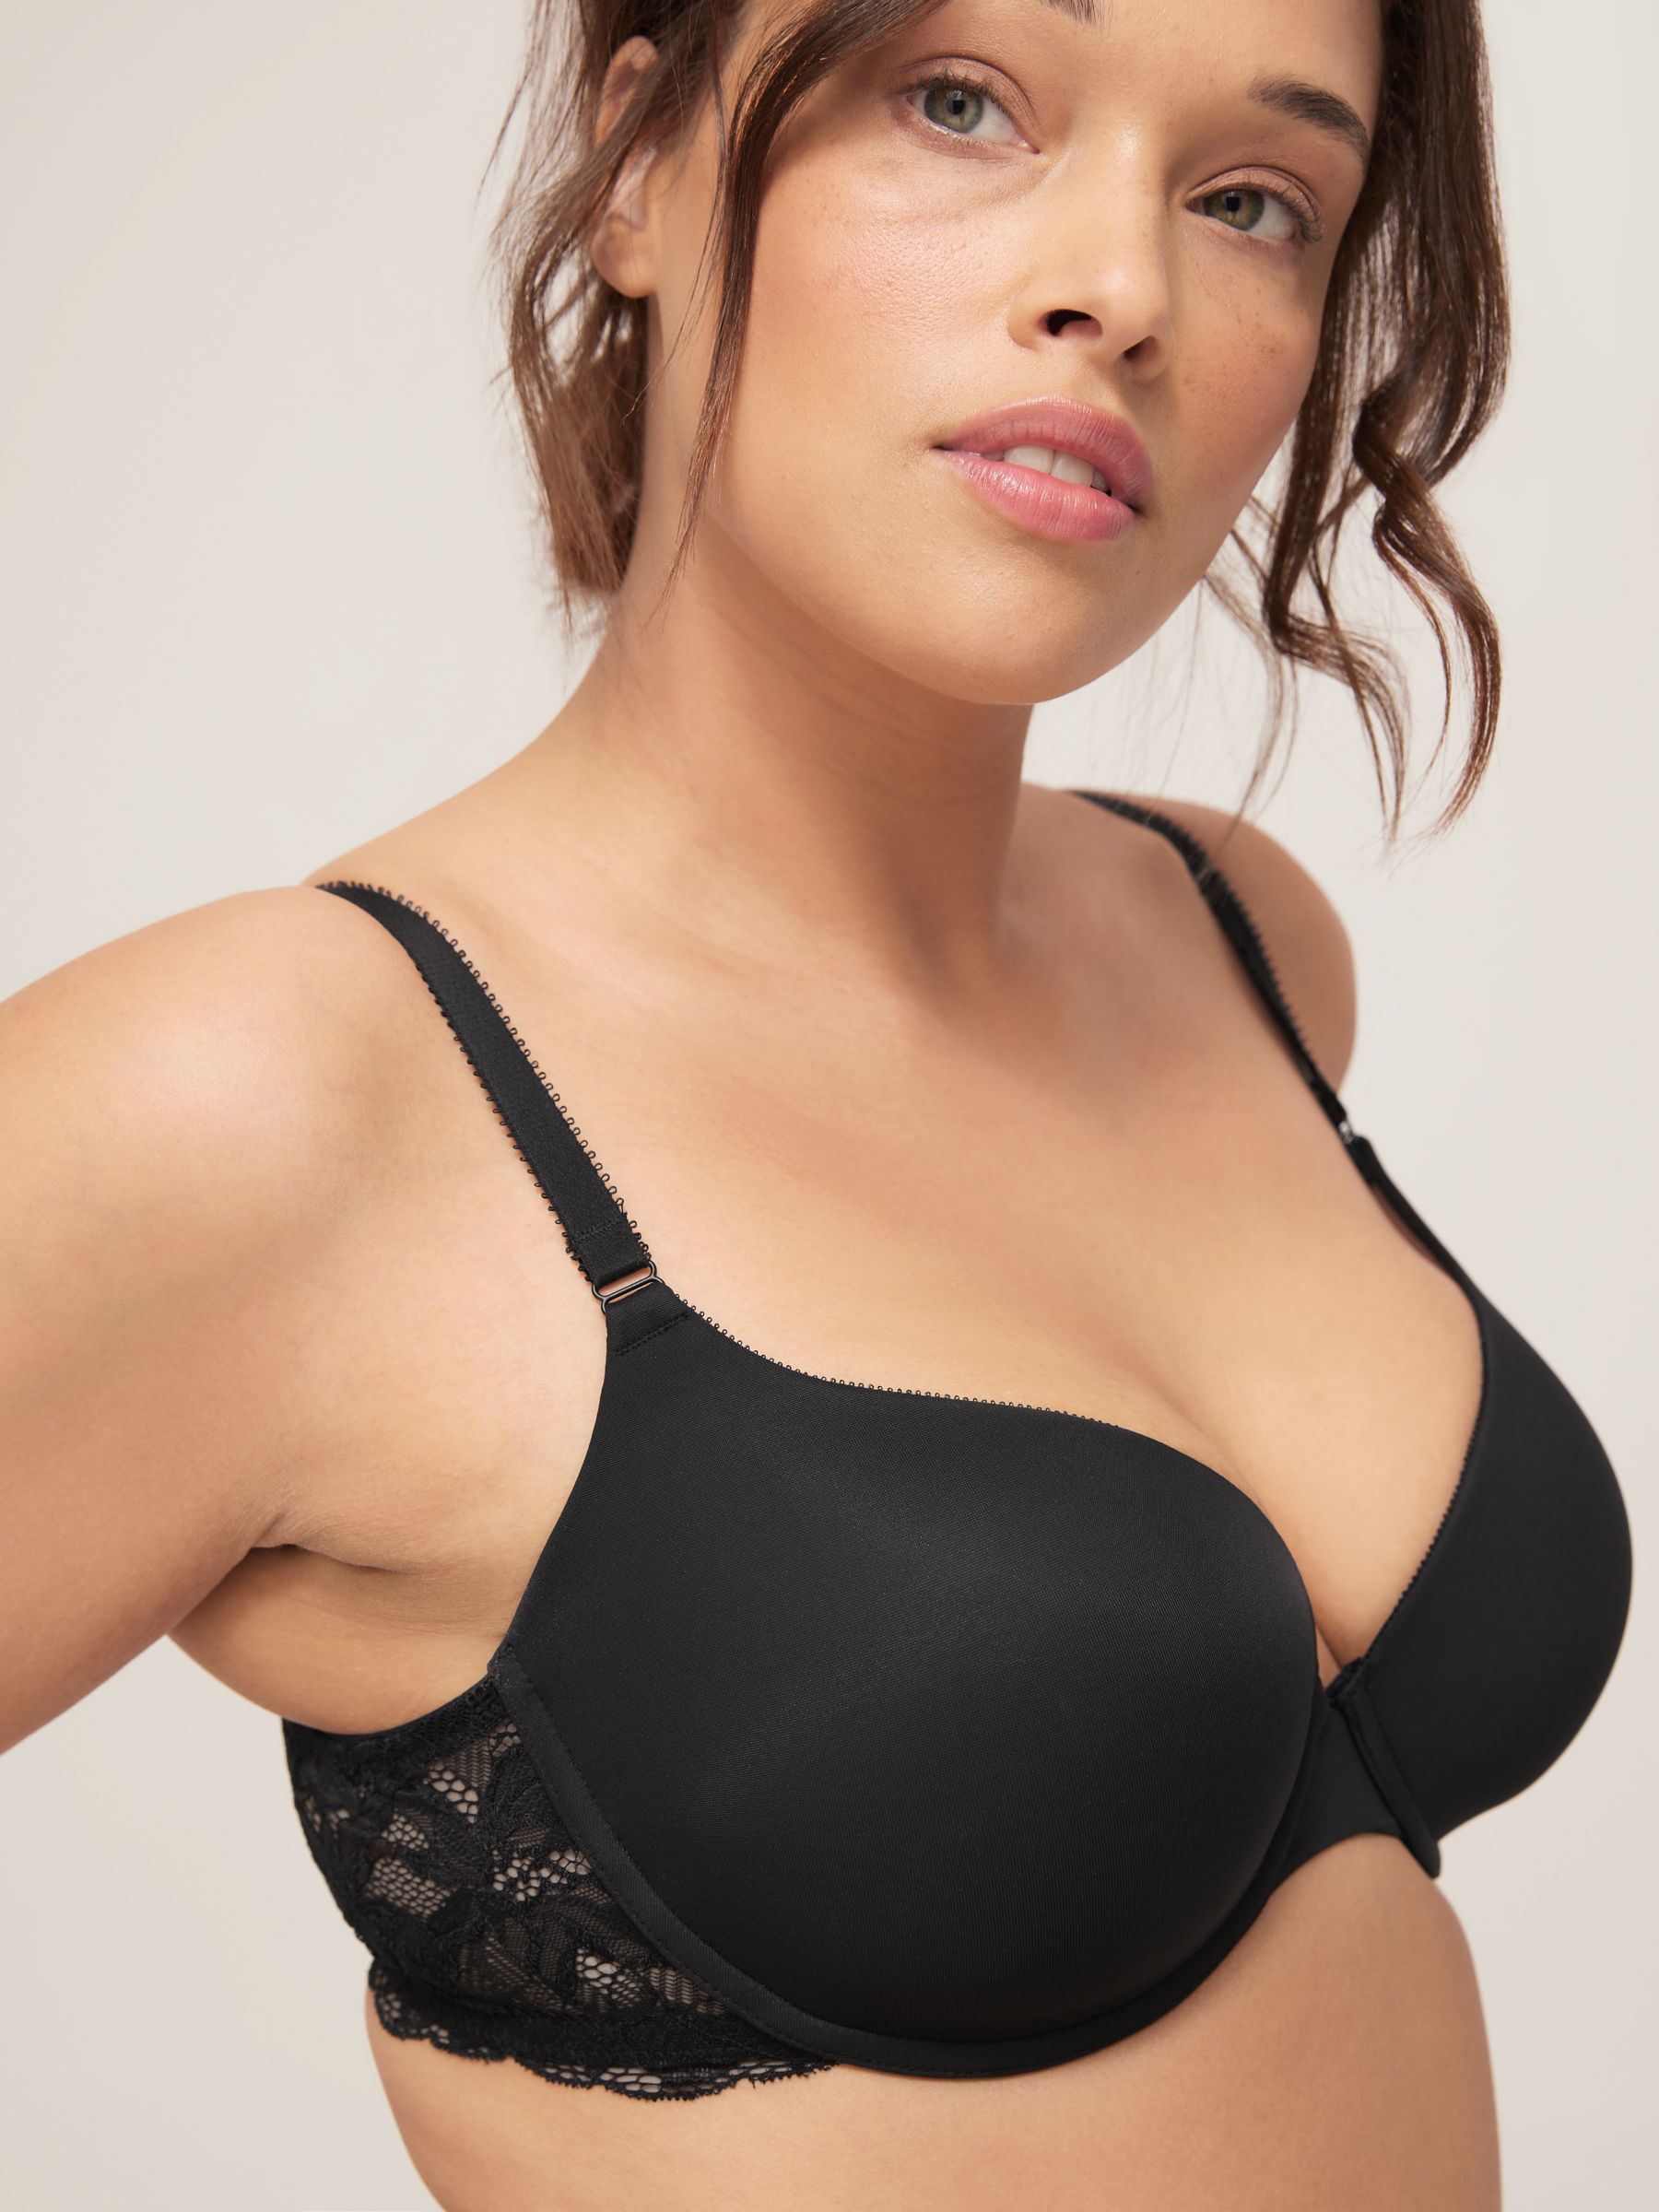 Black Bra, One of my large cup bras., Jewell Lewis